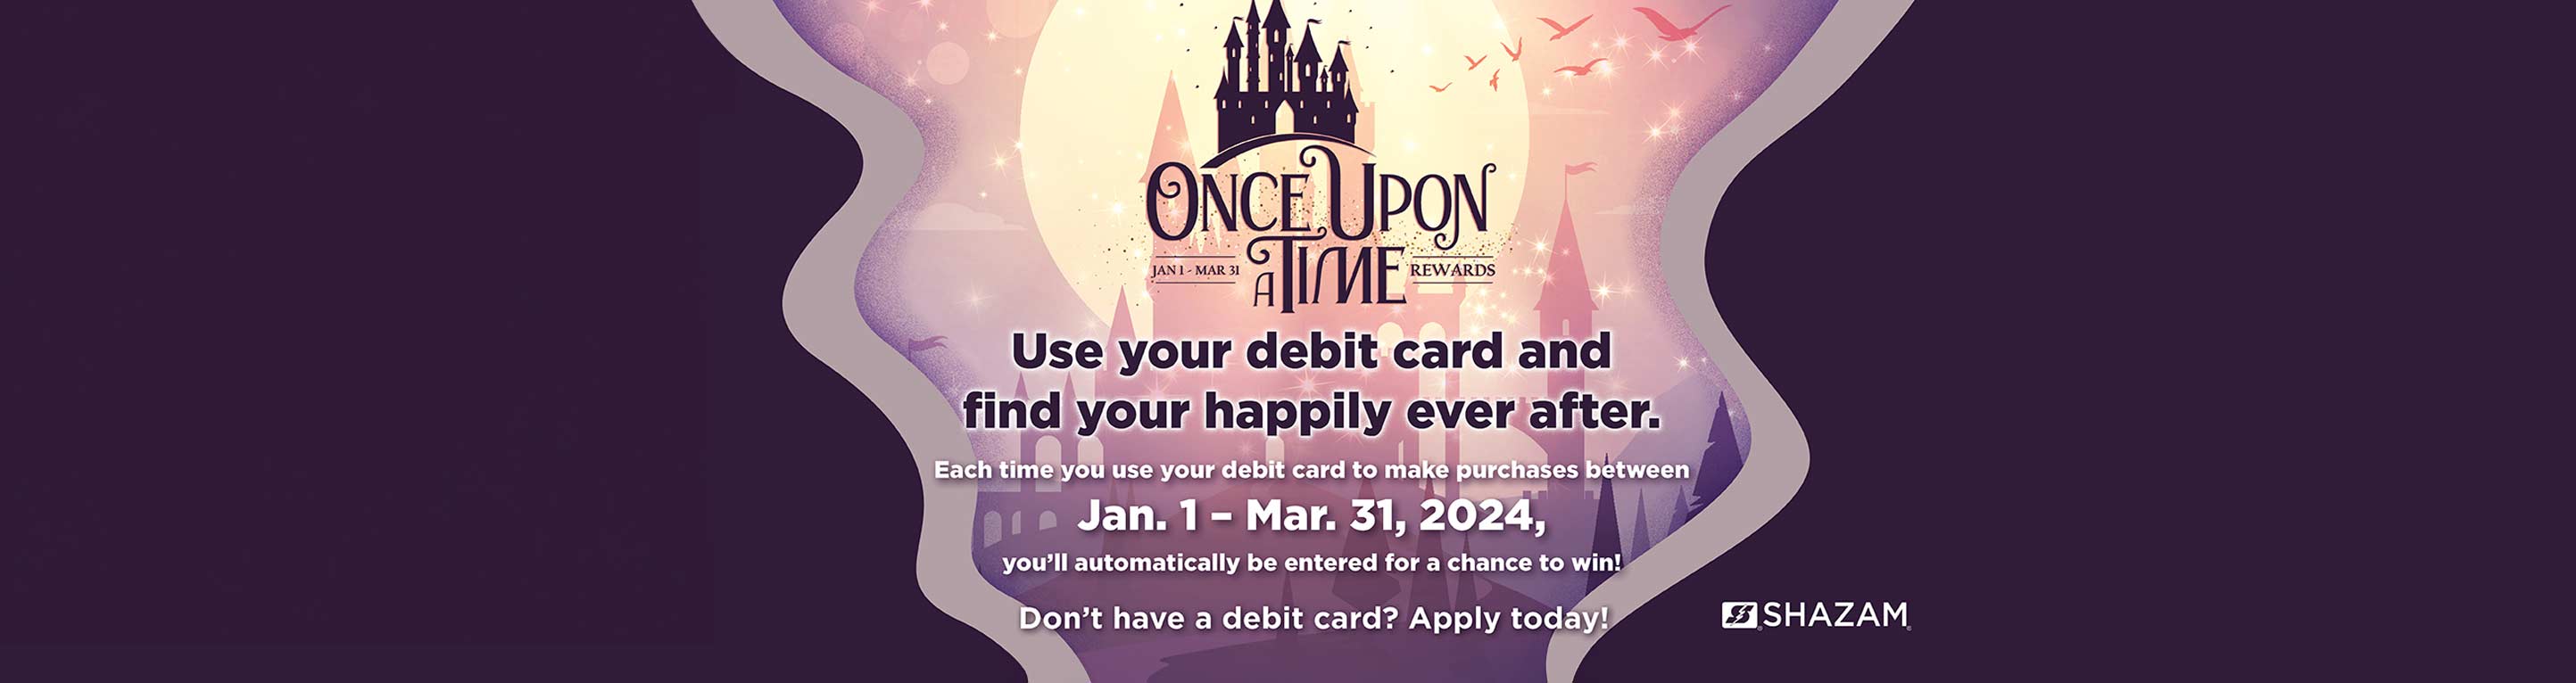 Once upon a time. Use your debit card and find your happily ever after. Each time you use your debit card to make purchases between January 1-March 31 you'll automatically be entered for a chance to win. Don't have a debit card? Apply today!